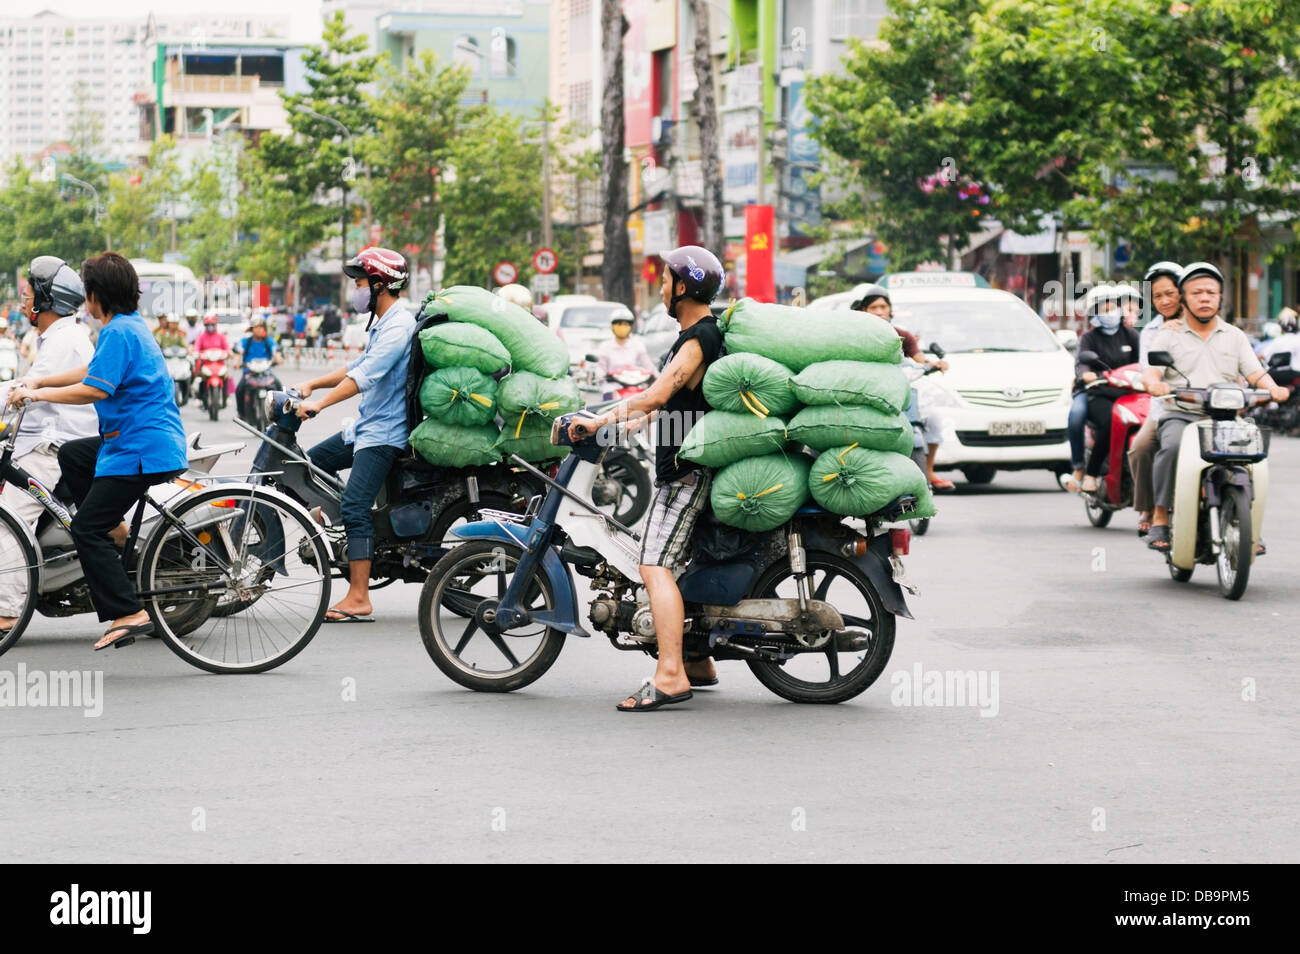 Ho Chi Minh City (Saigon), Vietnam - heavily loaded scooters being used to transport goods in traffic Stock Photo